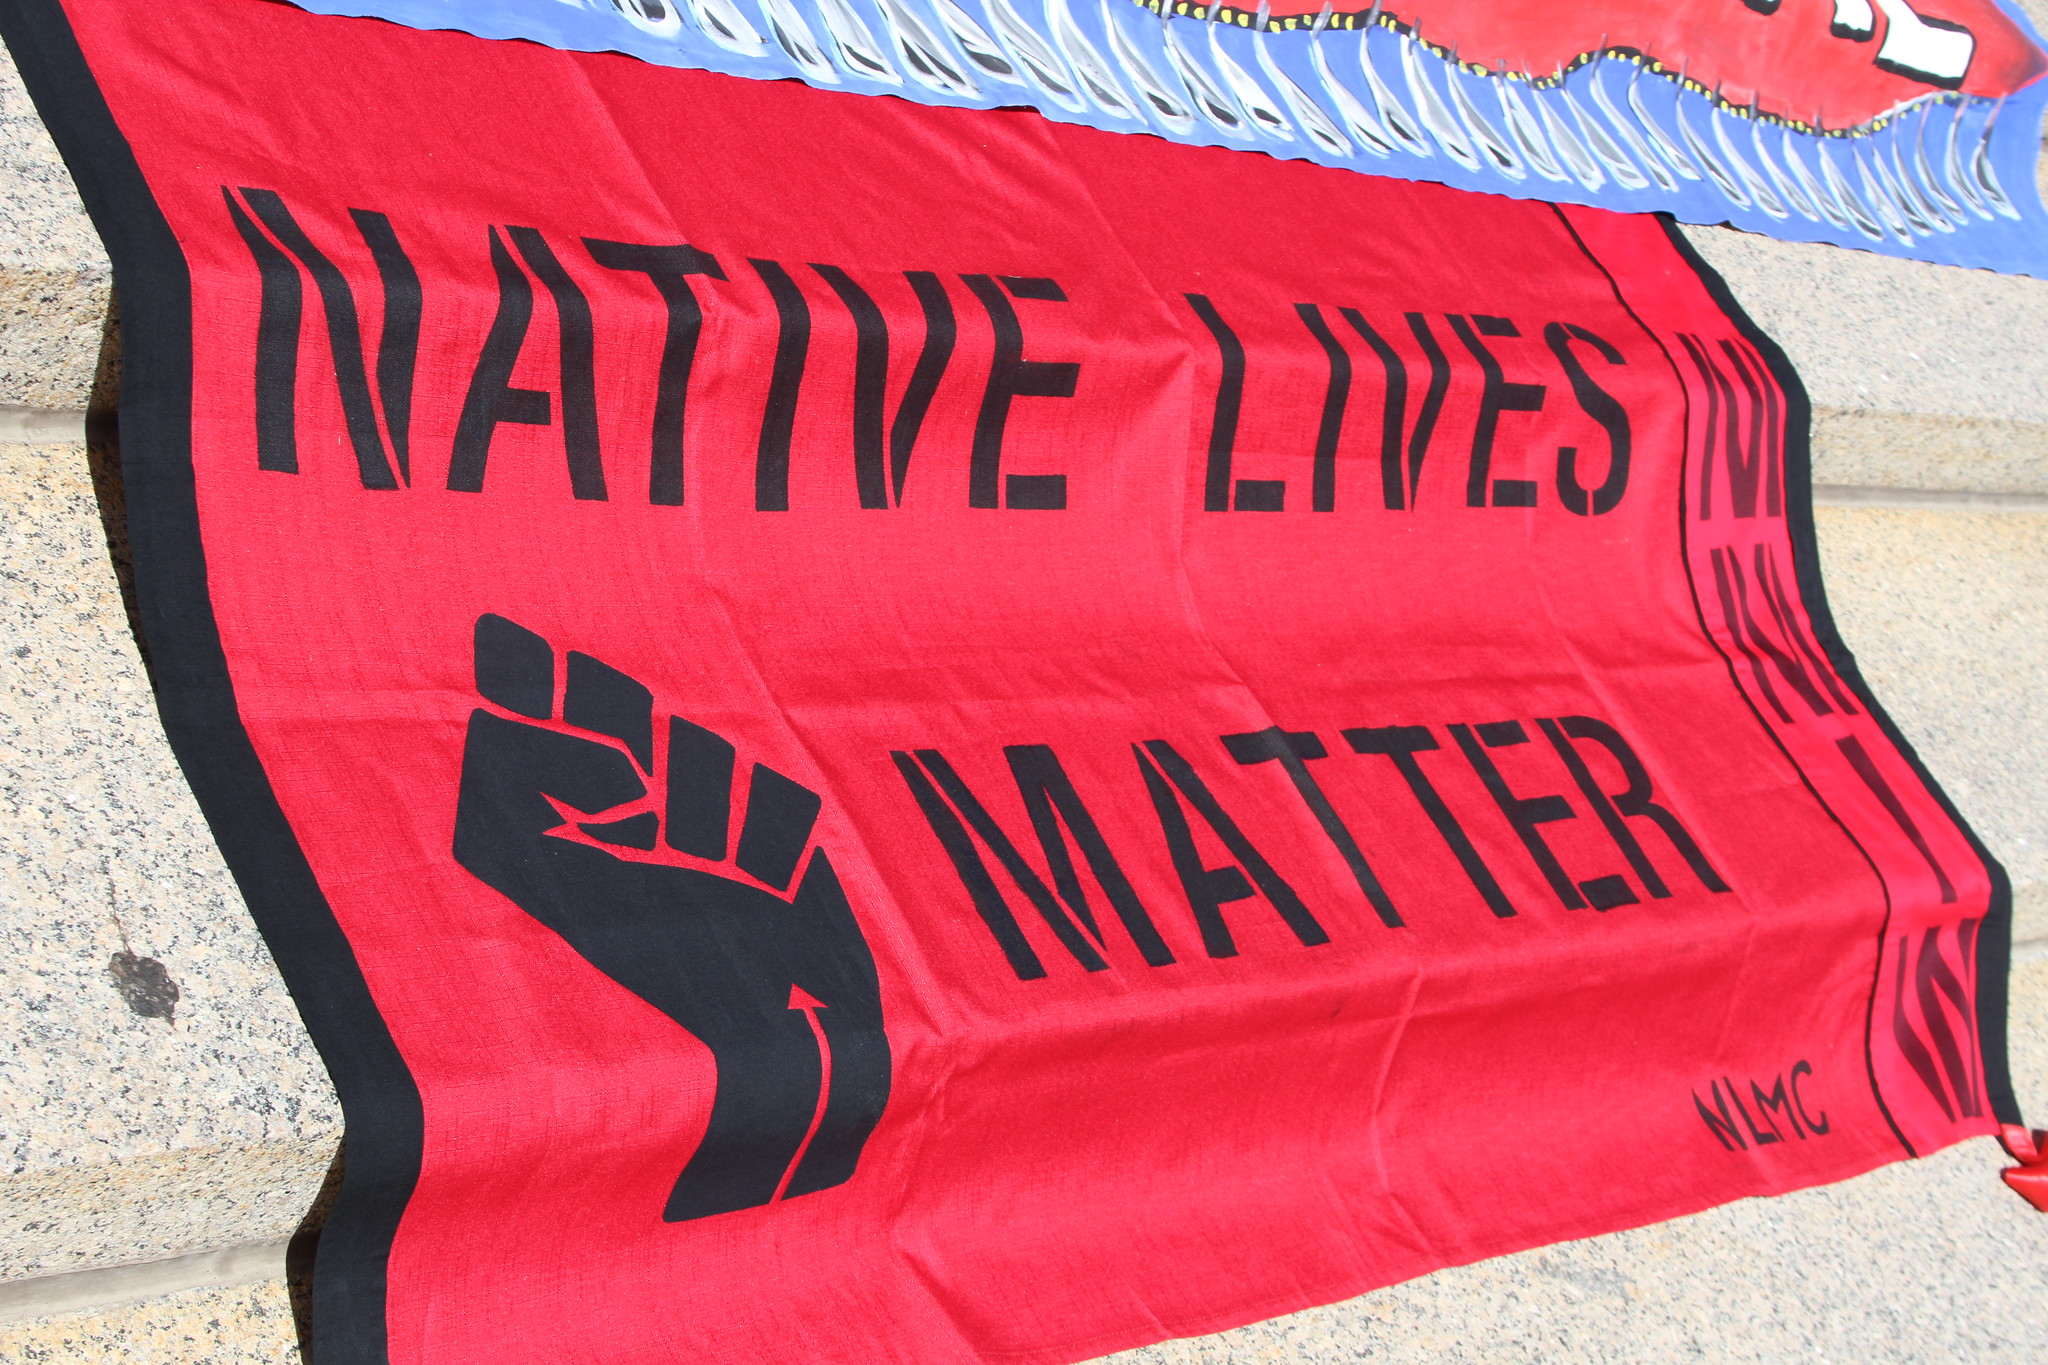 A large red banner reading "Native Lives Matter" with a fist drapes over stairs